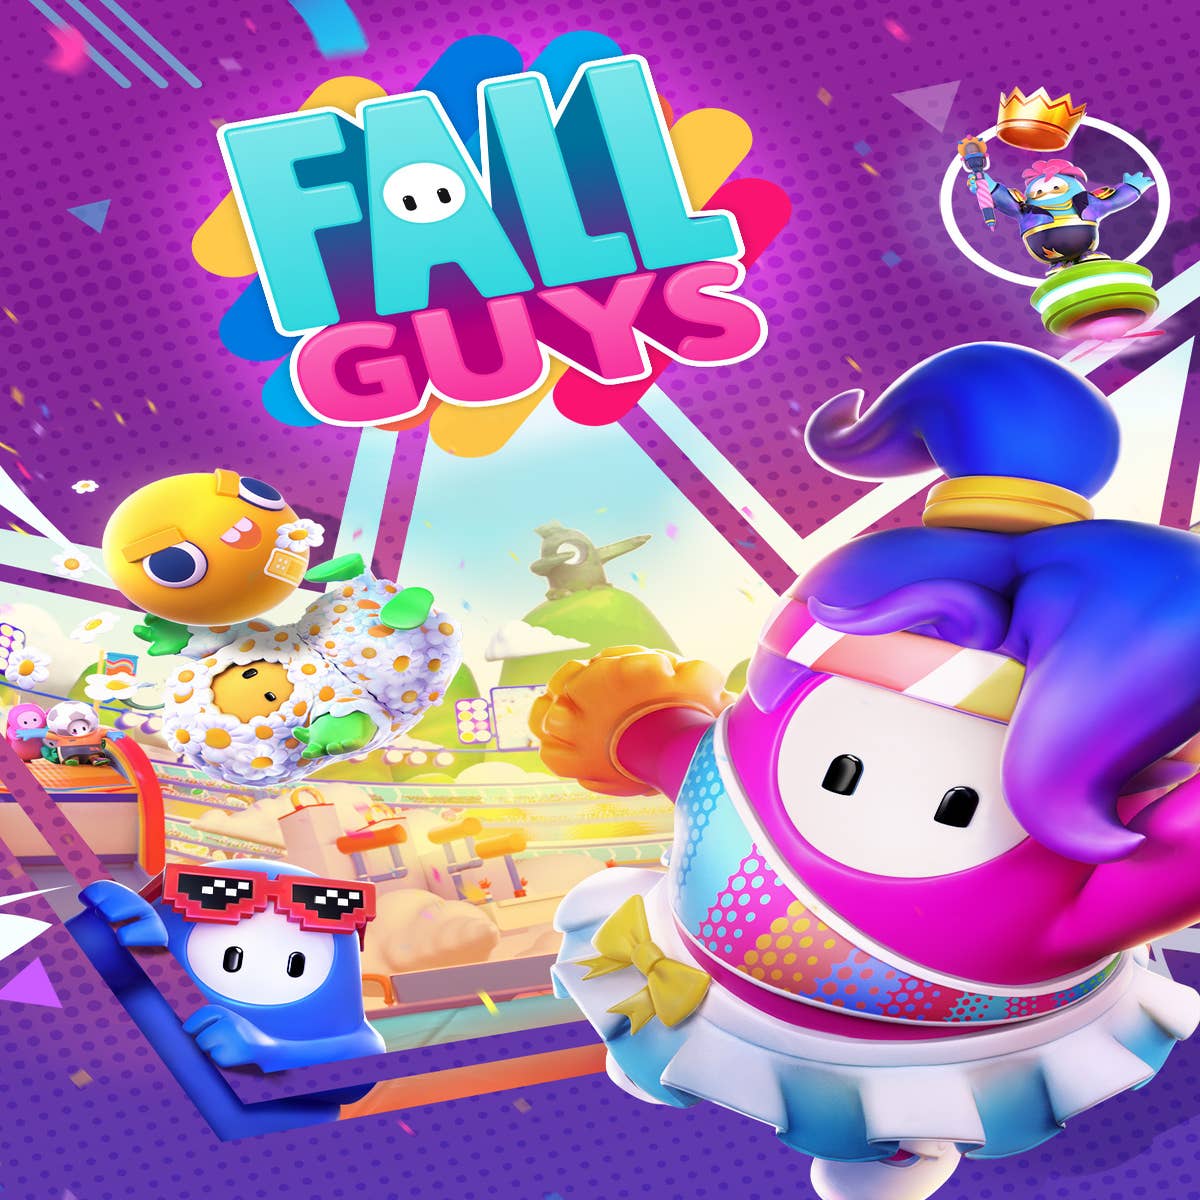 Fall Guys Xbox & Switch release date confirmed, plus crossplay